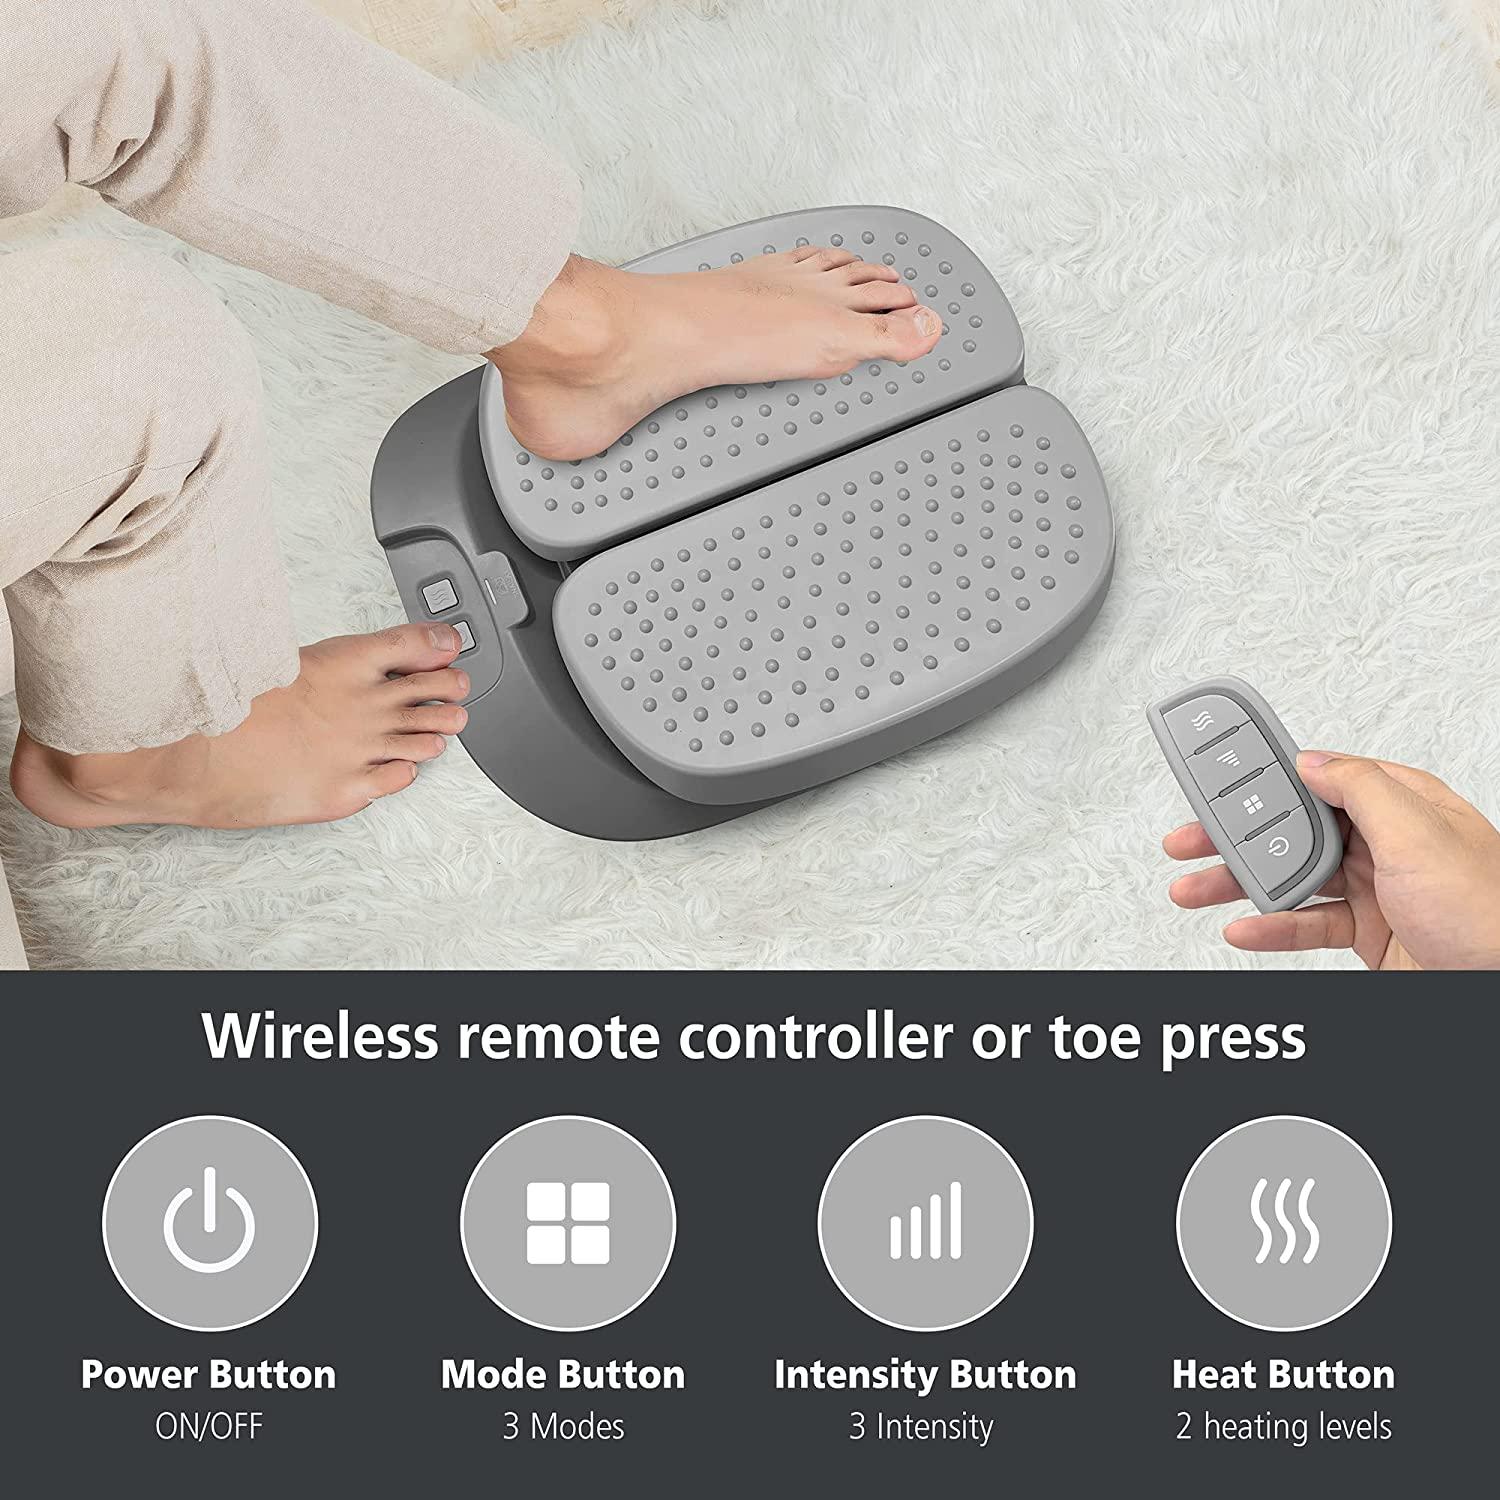 SNAILAX Vibration Foot Massager with Heat,Remote Control,Adjustable  Vibration Speed Electric Foot Massager Machine for Circulation,Plantar  Fasciitis, Pain Relief Grey - Vibration Massage